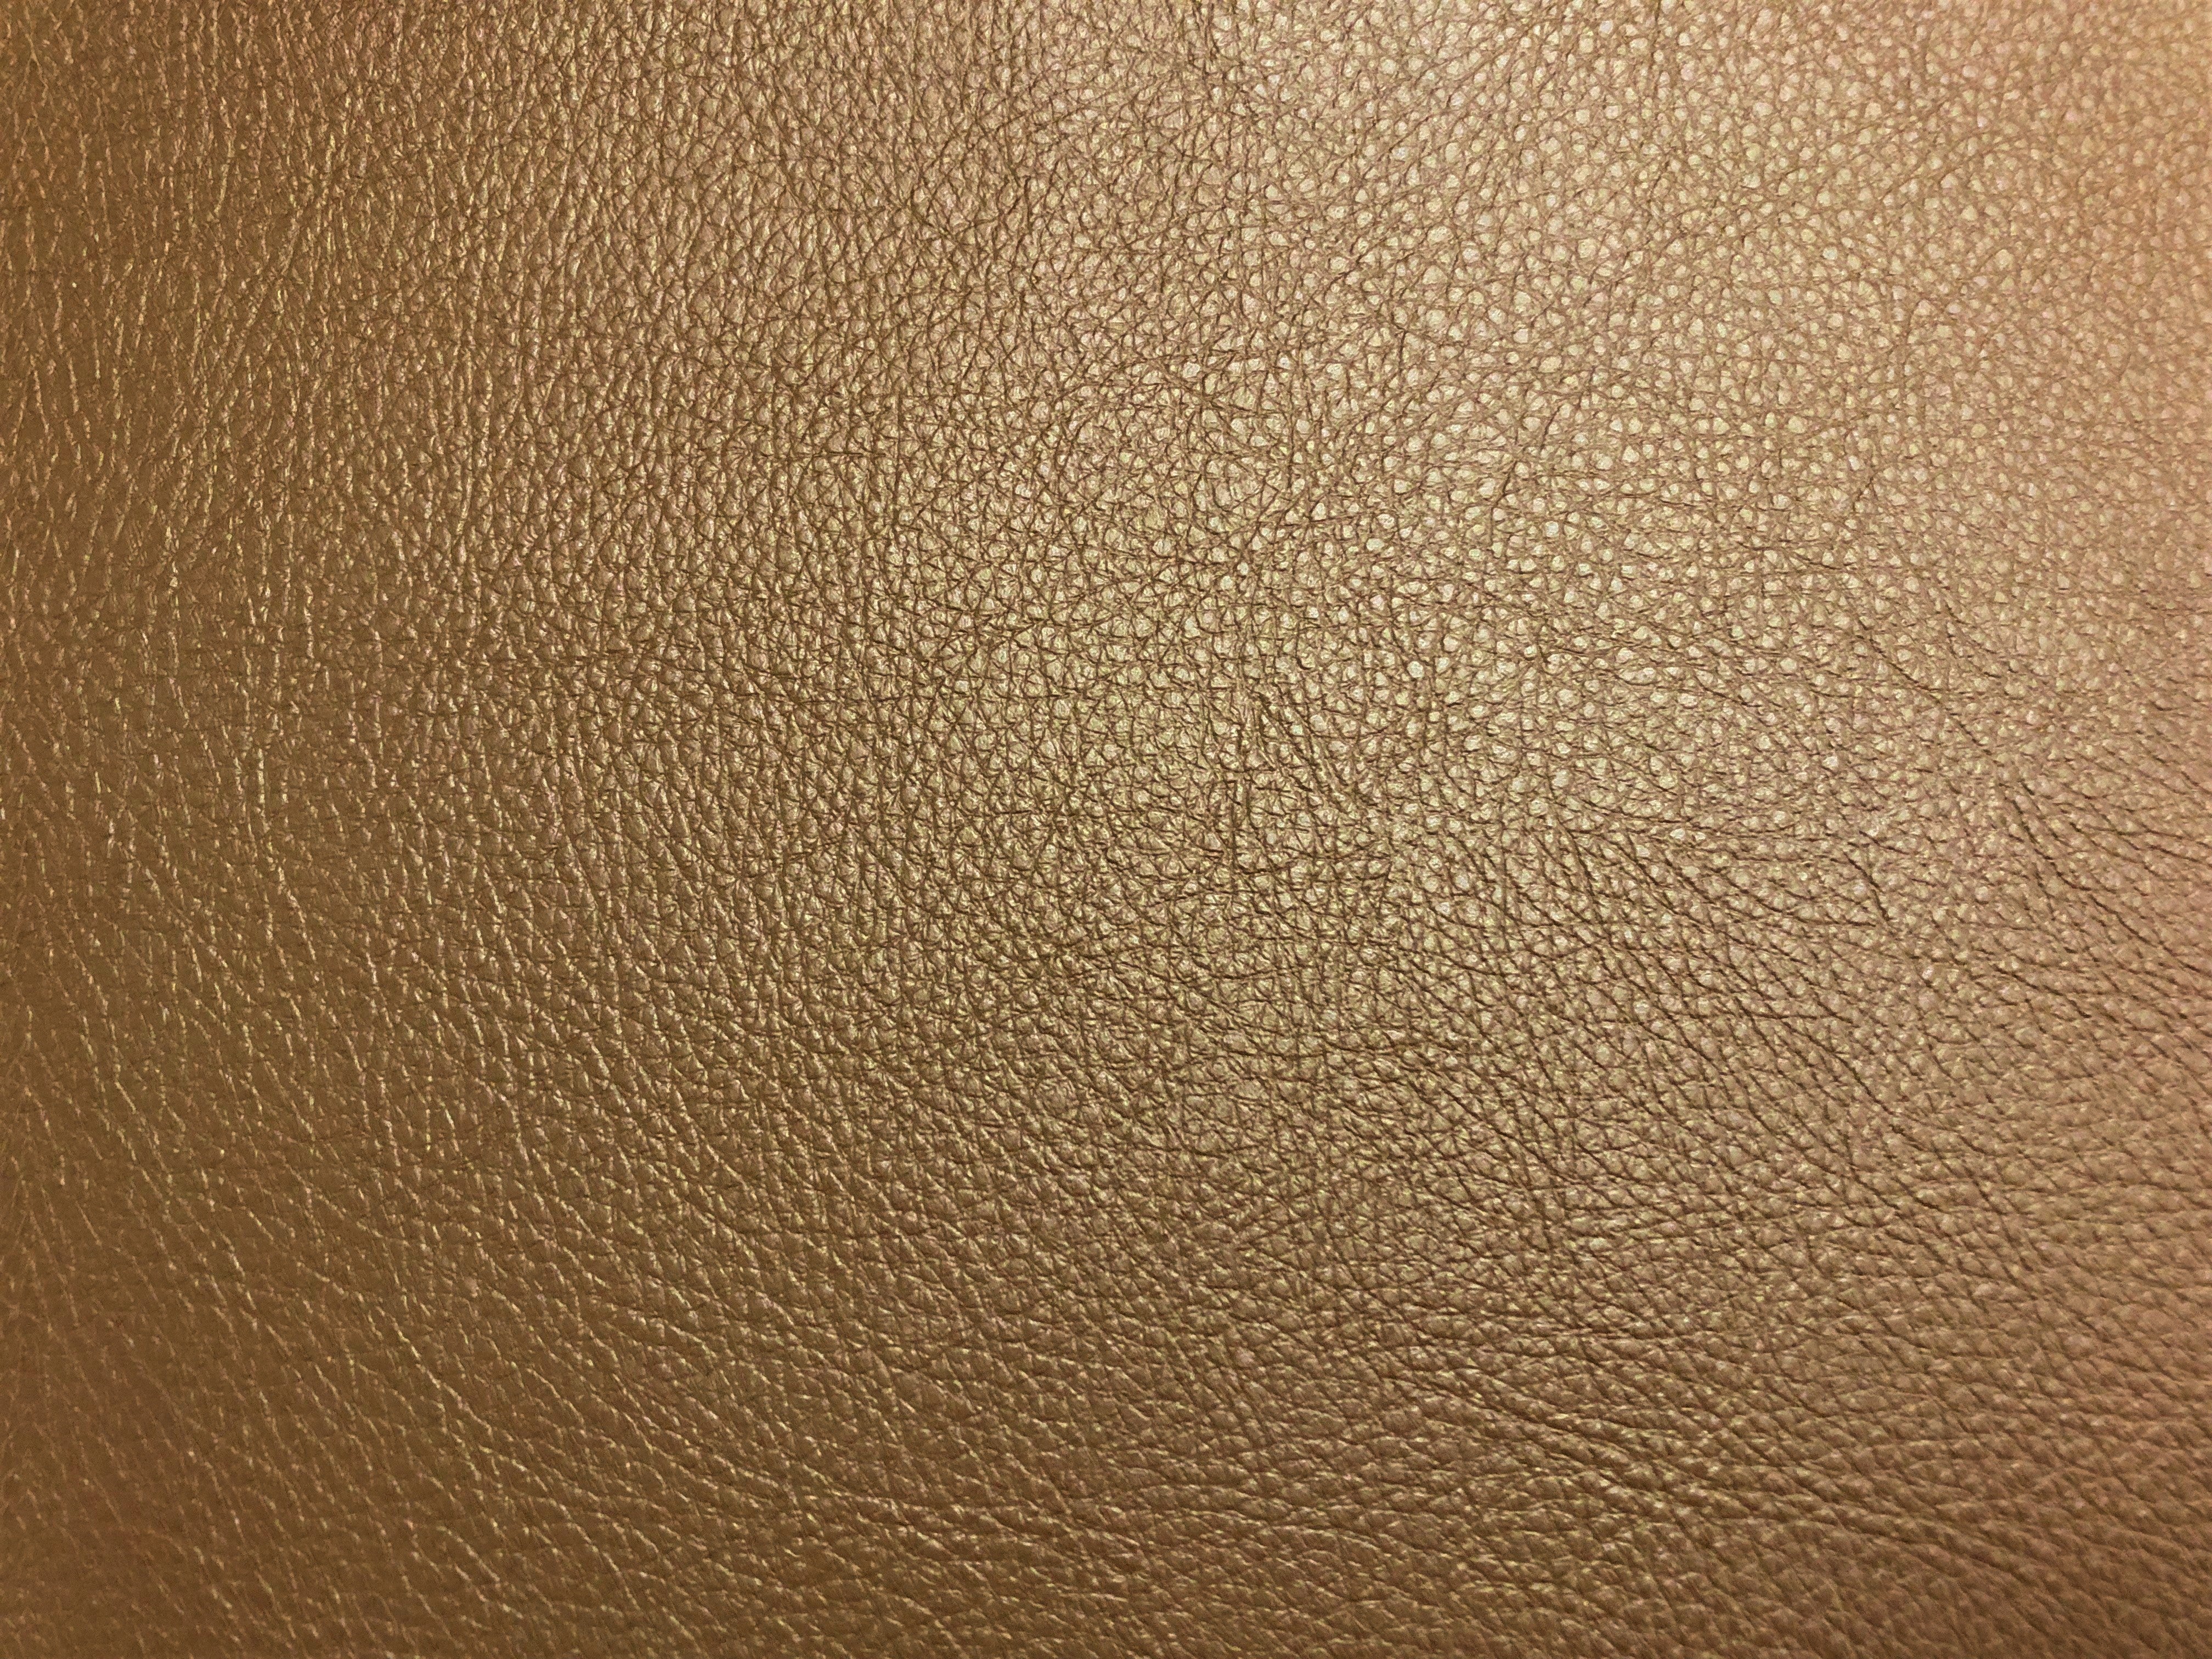 Brown - Oxen Series Vinyl – Gilbreath Upholstery